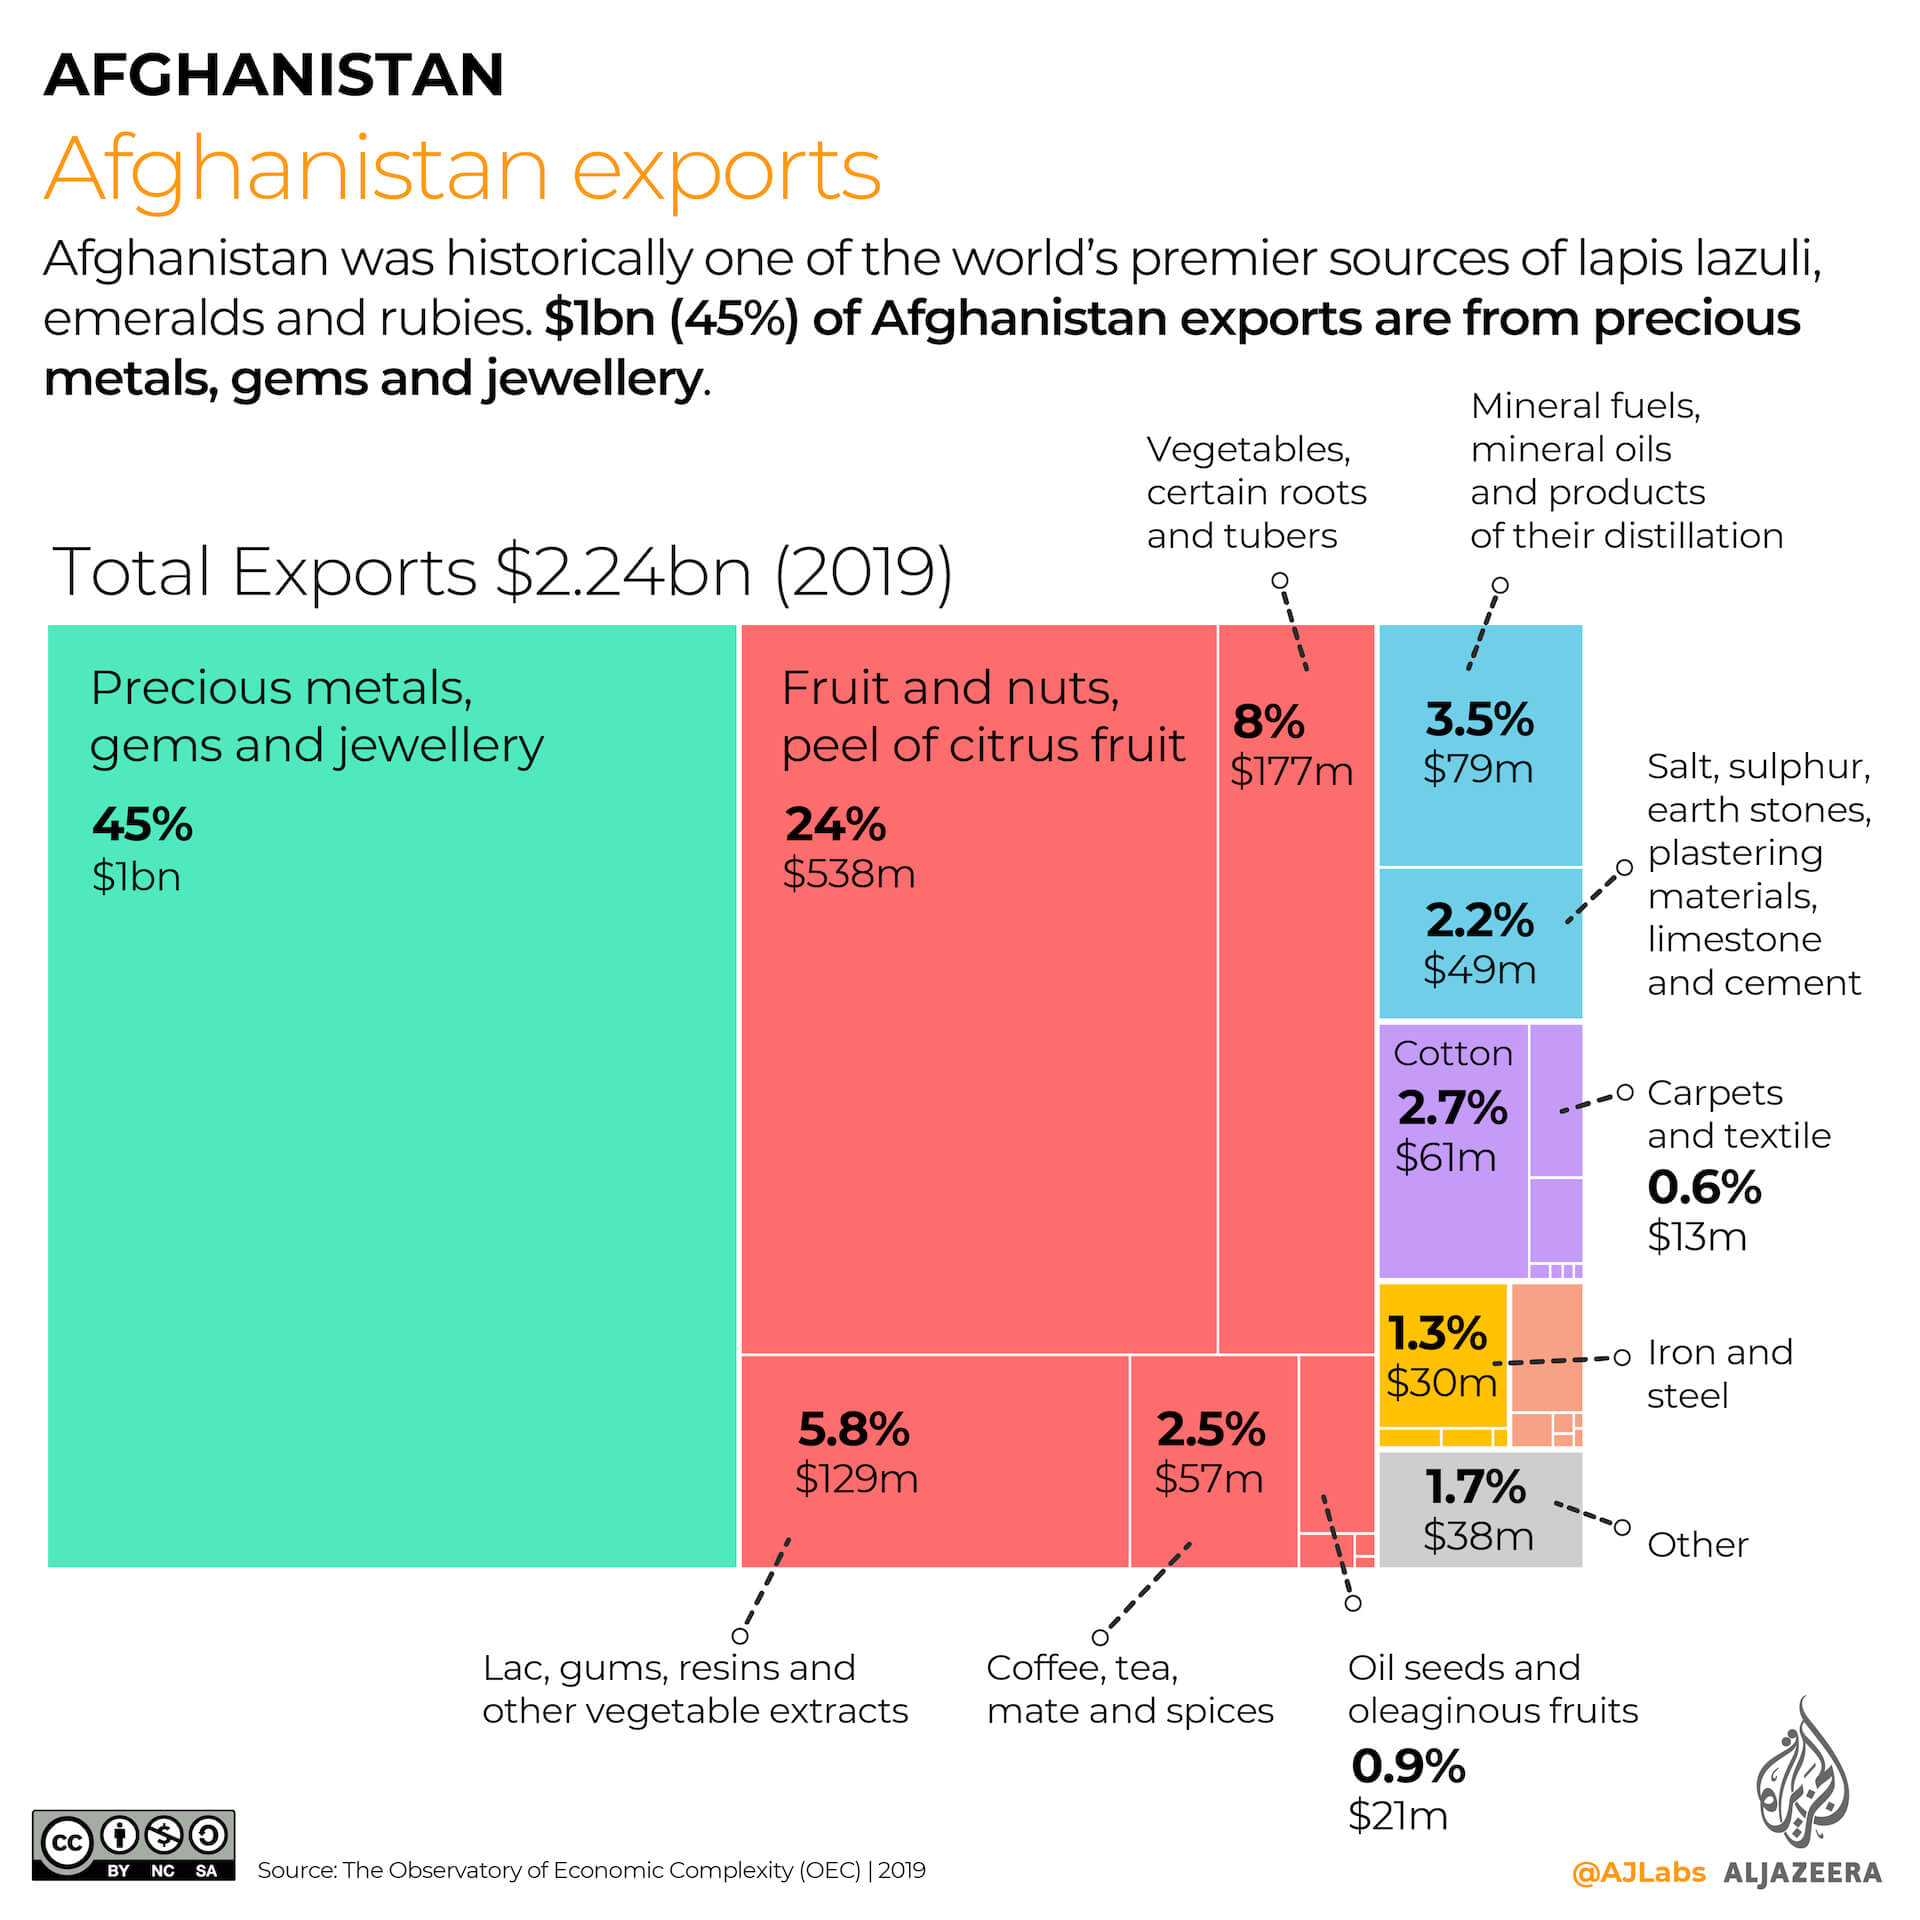 INTERACTIVE - Afghanistan exports